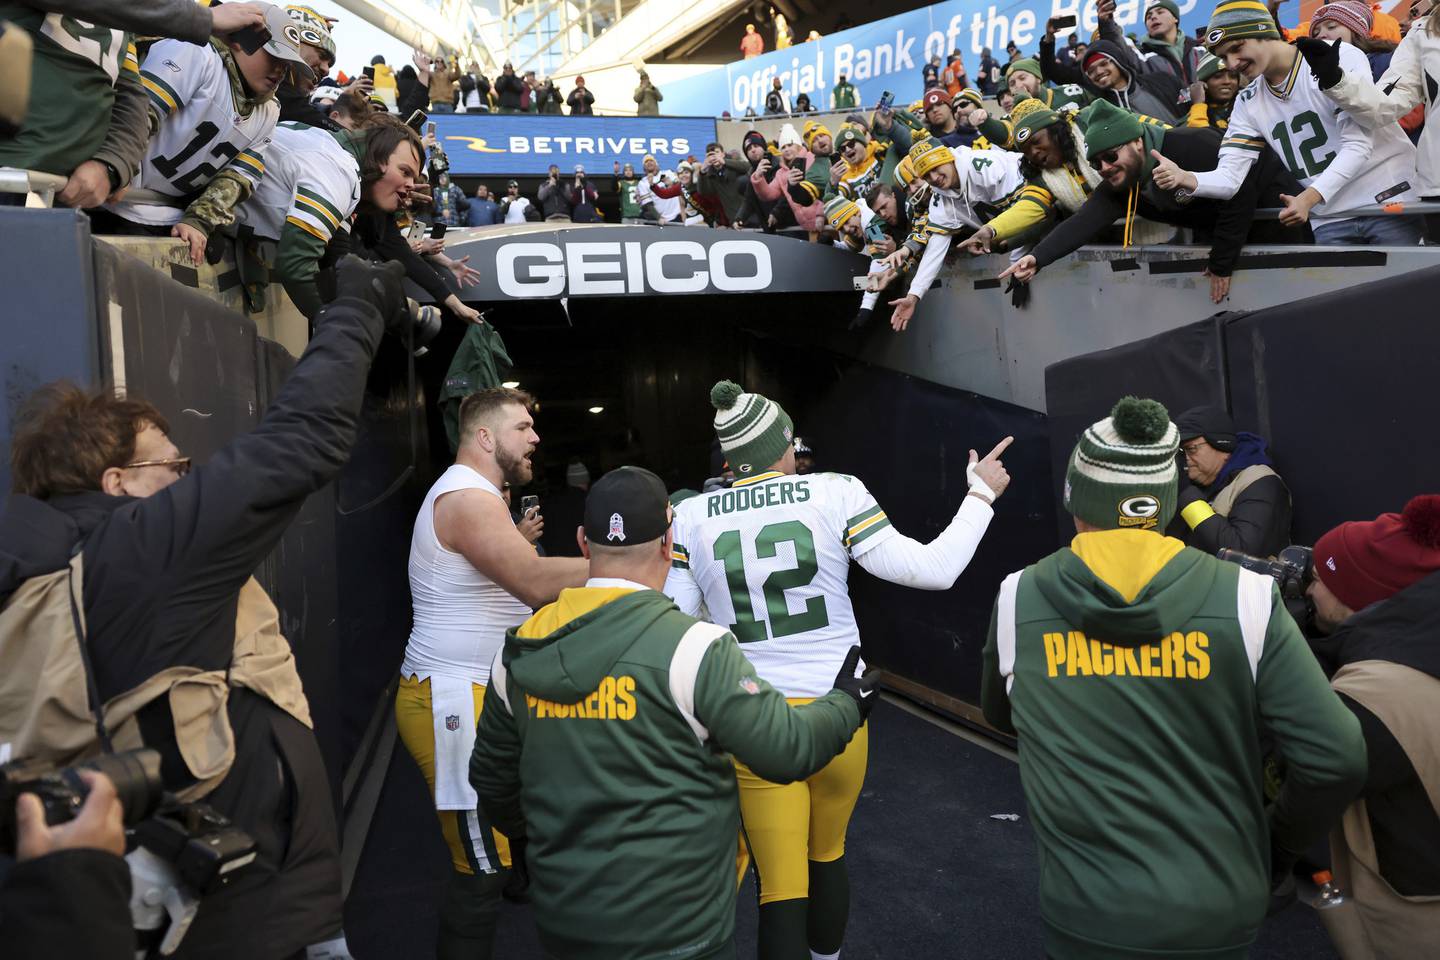 Packers quarterback Aaron Rodgers points to Packers fans in the stands as he exits Soldier Field after a victory over the Bears on Dec. 4, 2022.